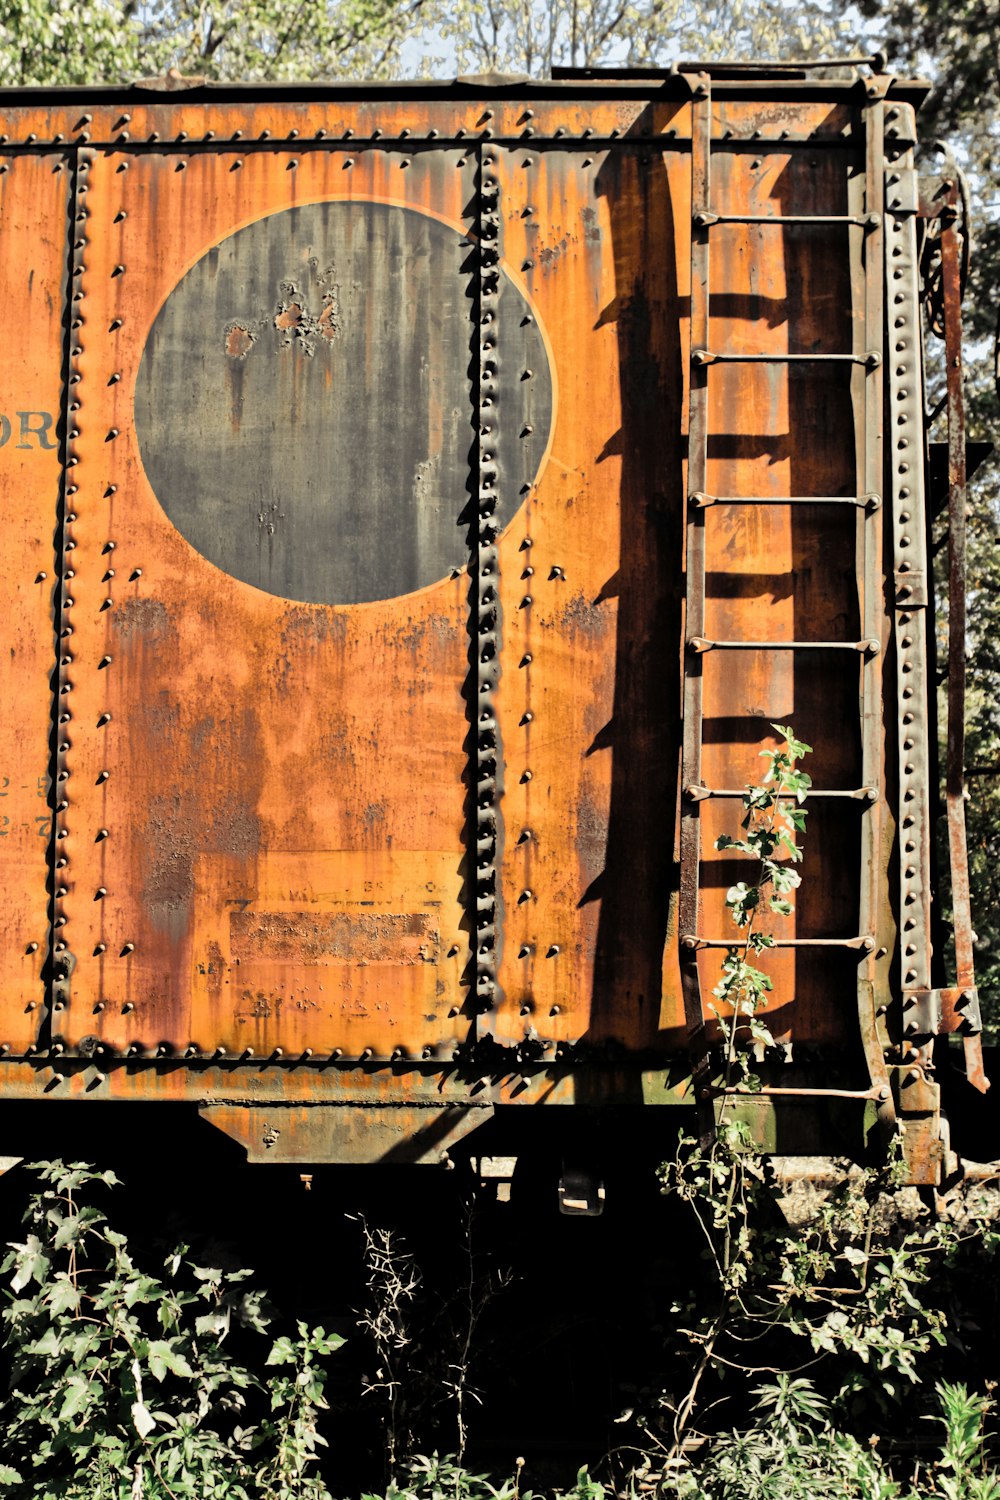 an old rusted train car sitting in the woods